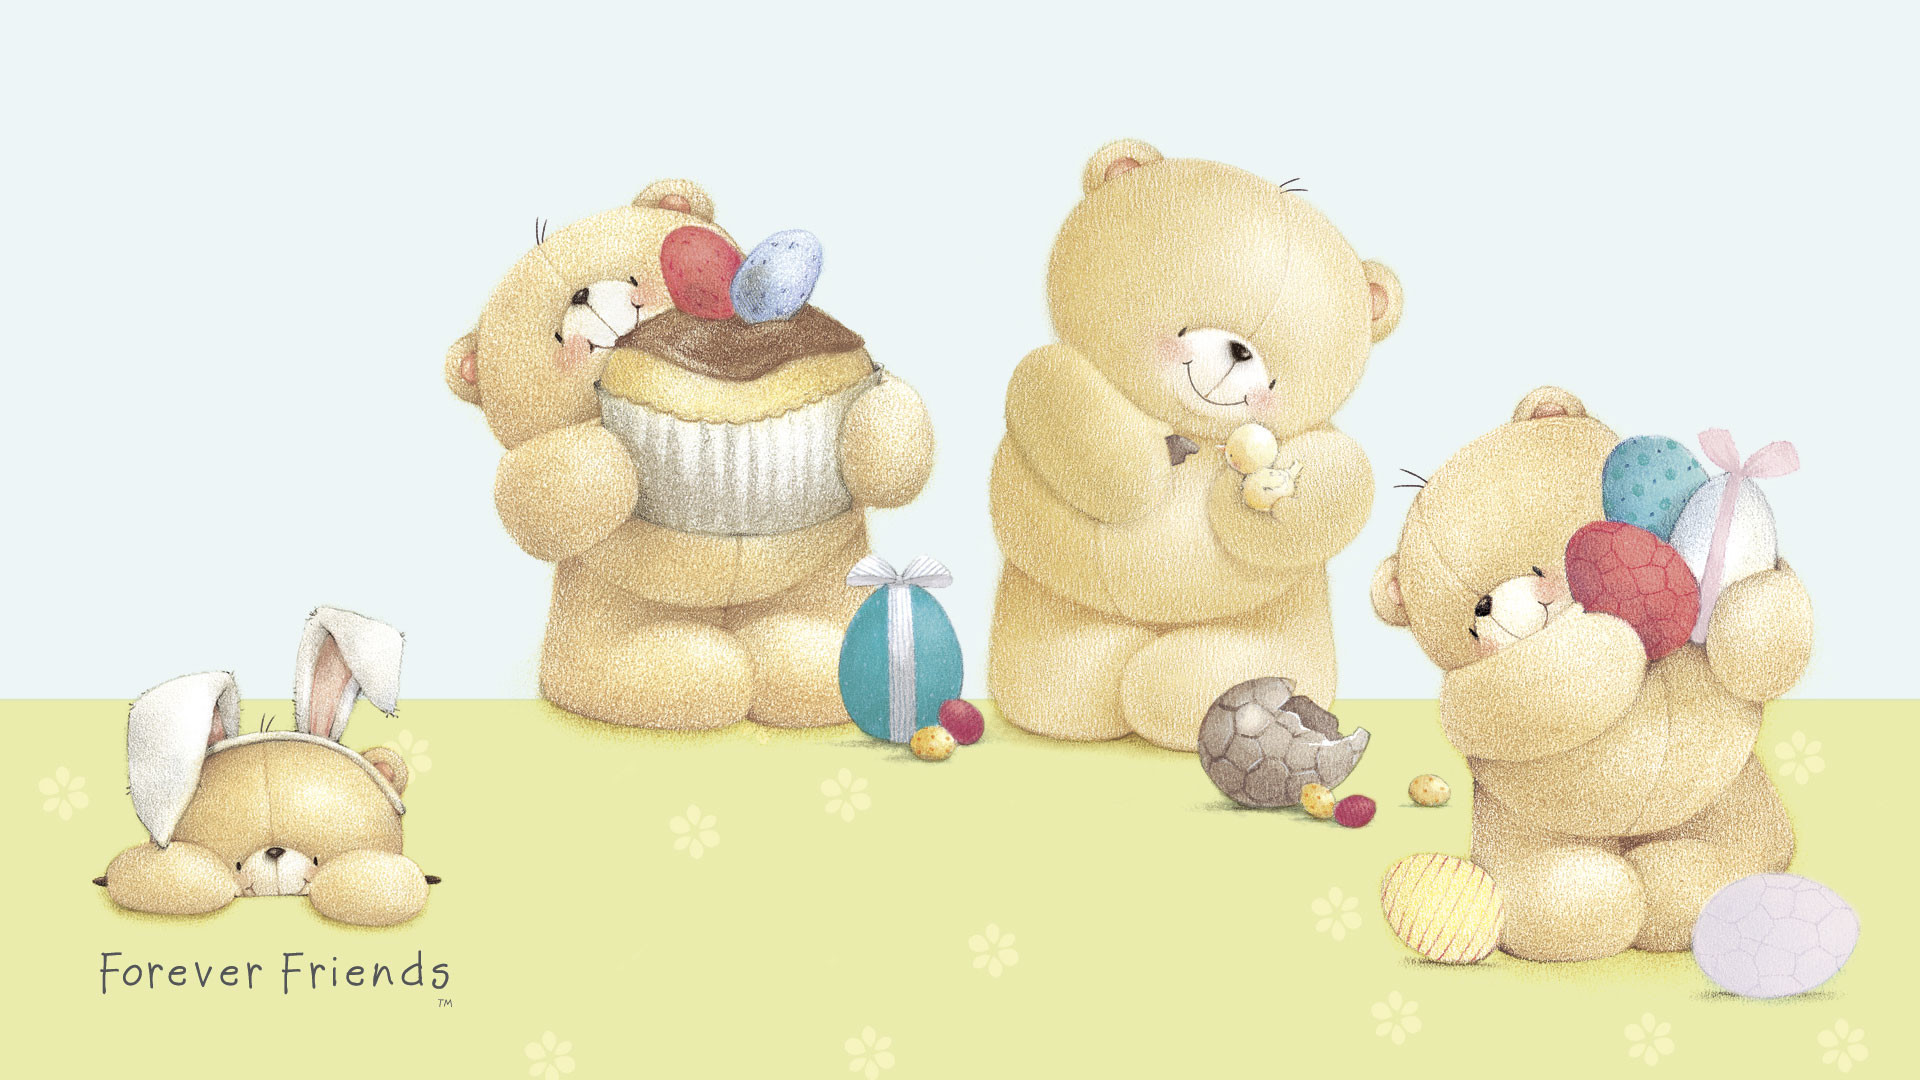 friends forever wallpaper,toy,animal figure,stuffed toy,baby toys,figurine